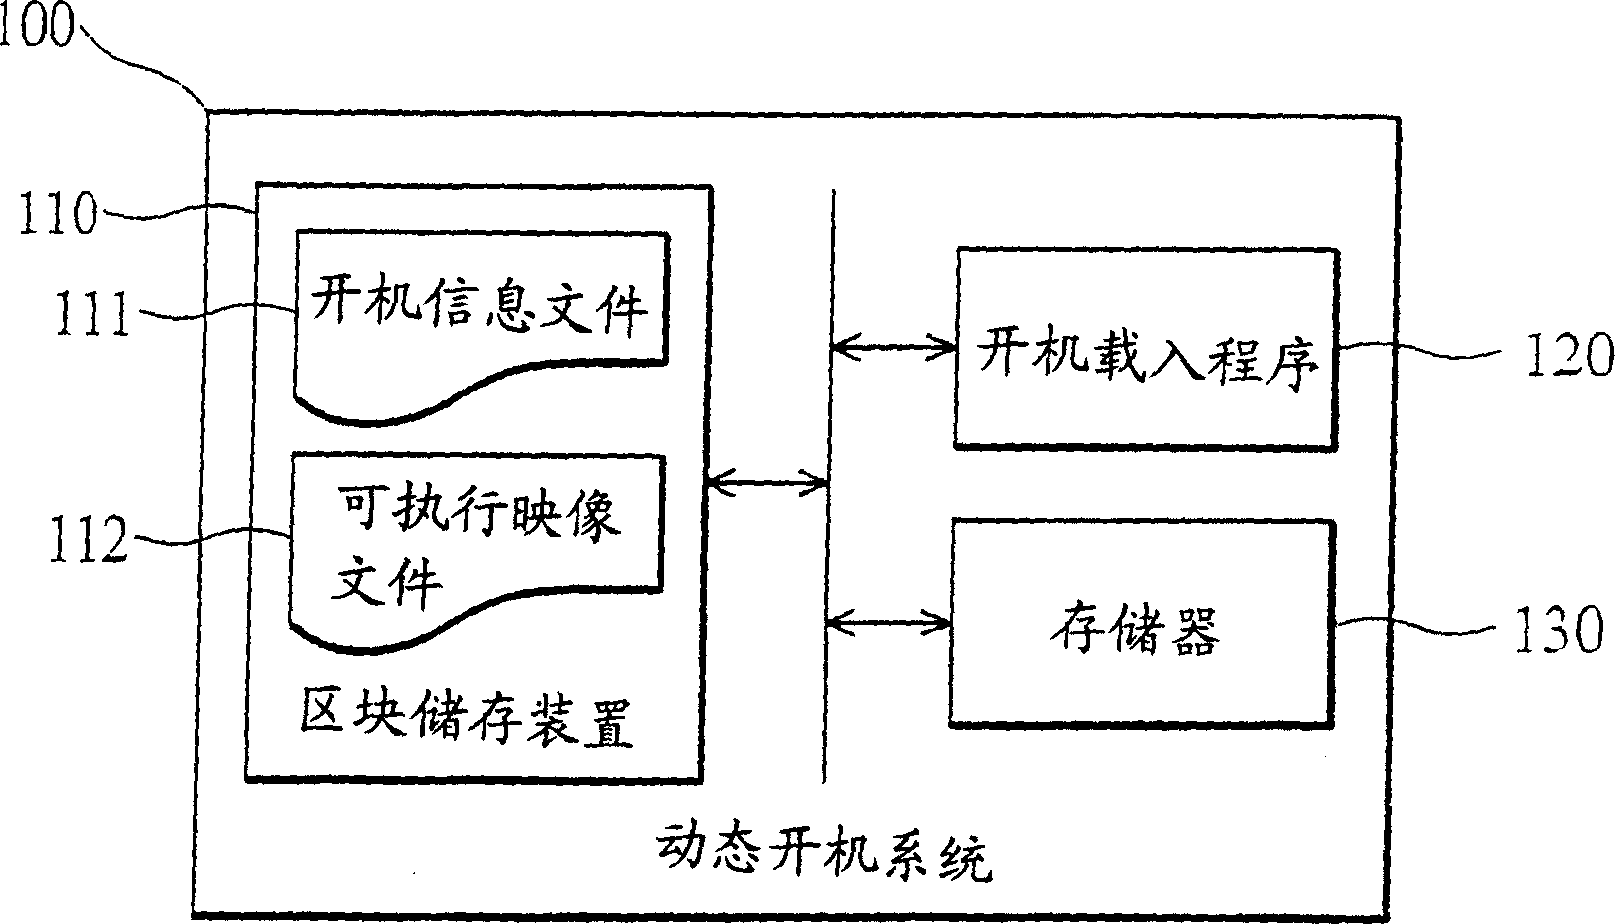 Dynamic starting up system and method, and method for structuring mapping document of operation system